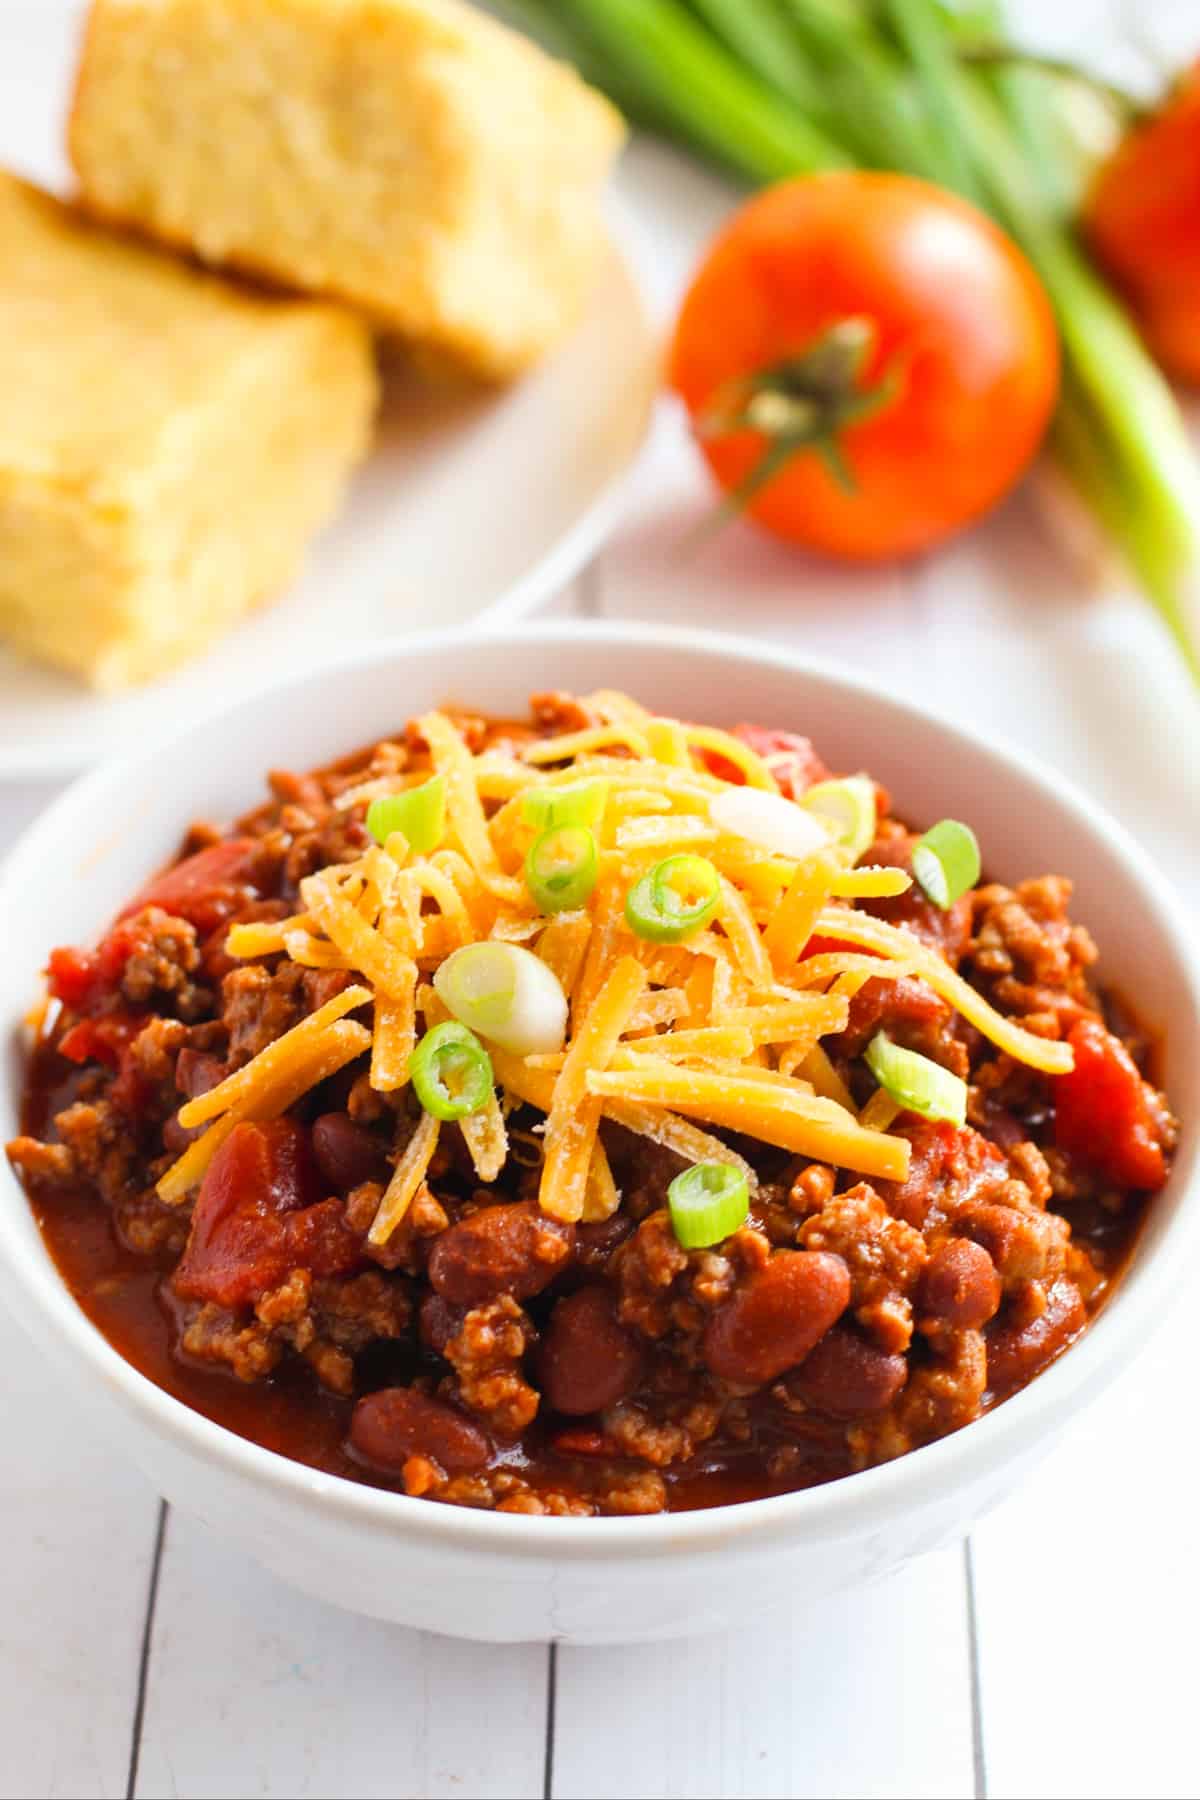 bowl of chili with beans and ground beef topped with shredded cheese and scallions. A tomato, scallions, and rolls are in the background.